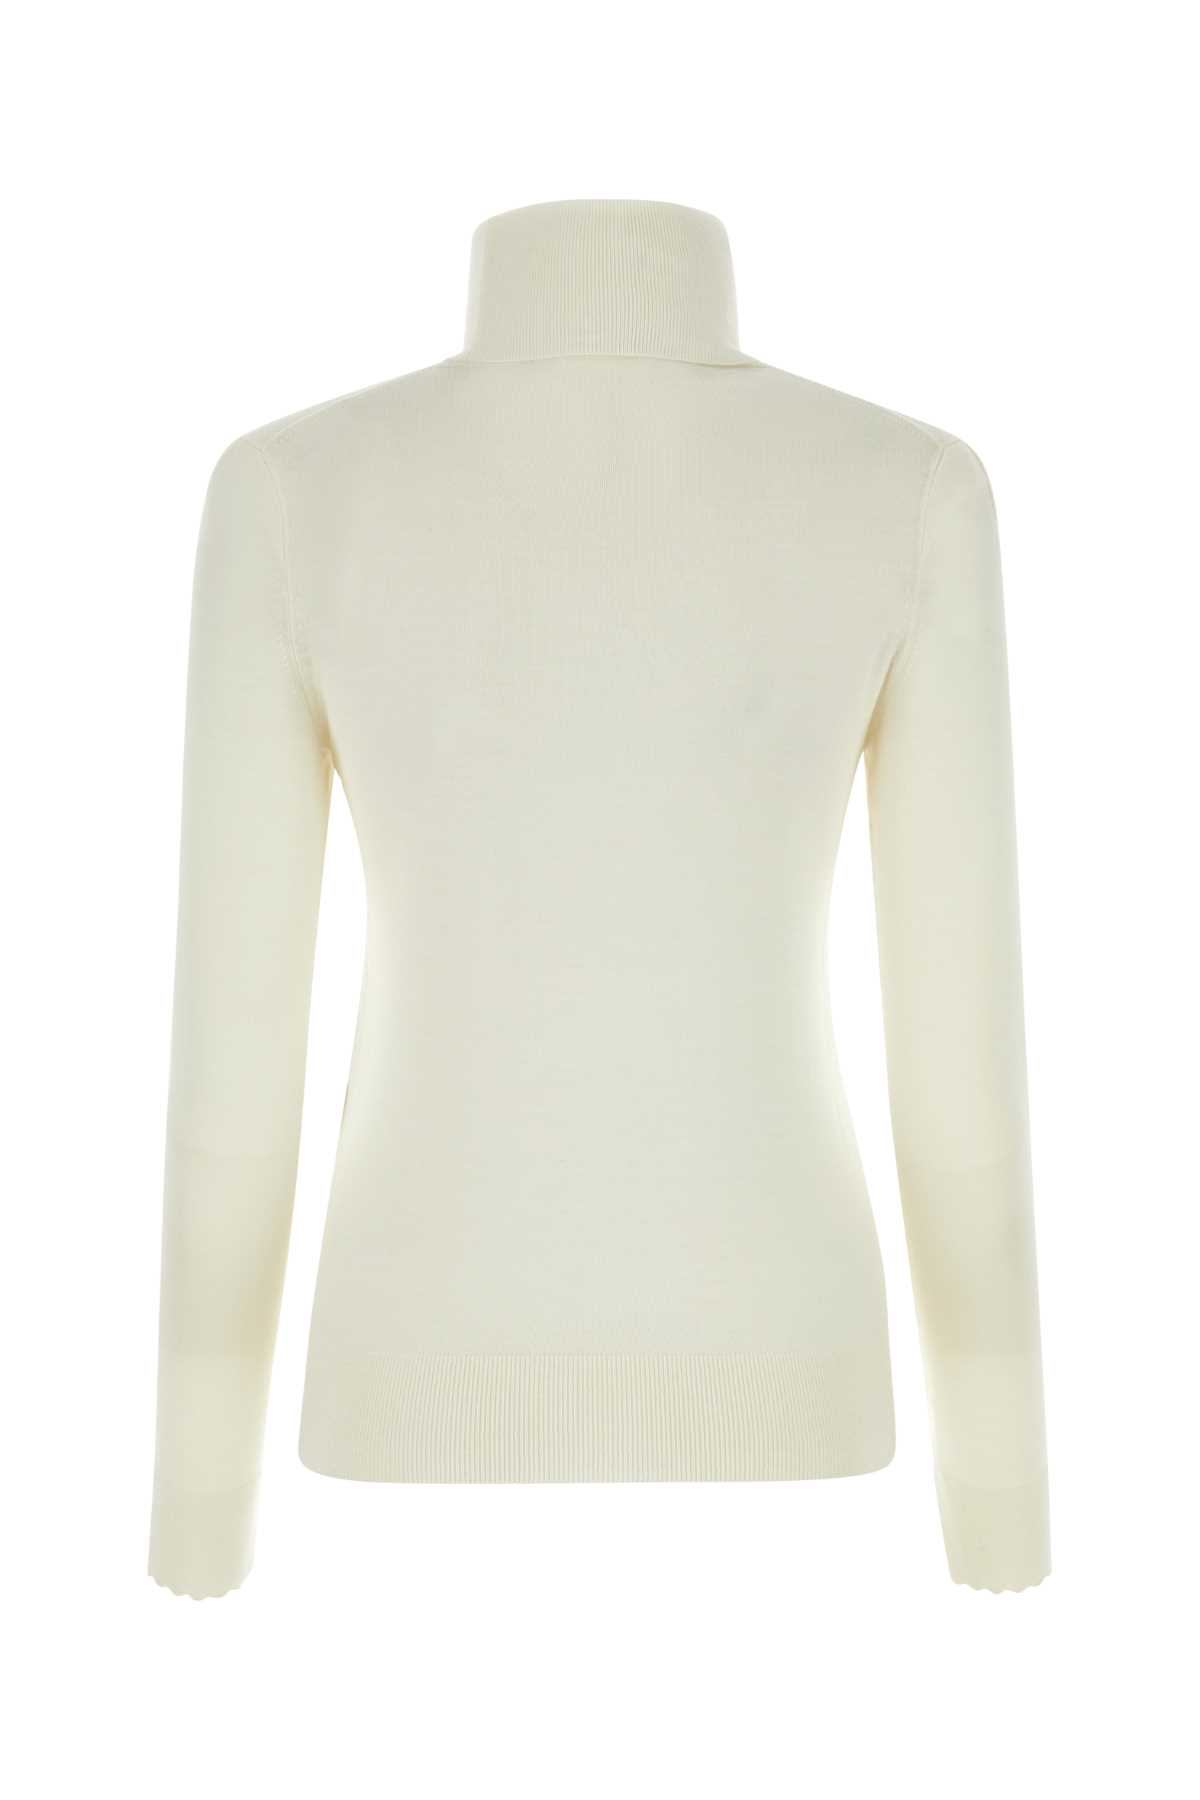 Chloé Ivory Wool Jumper In Iconicmilk